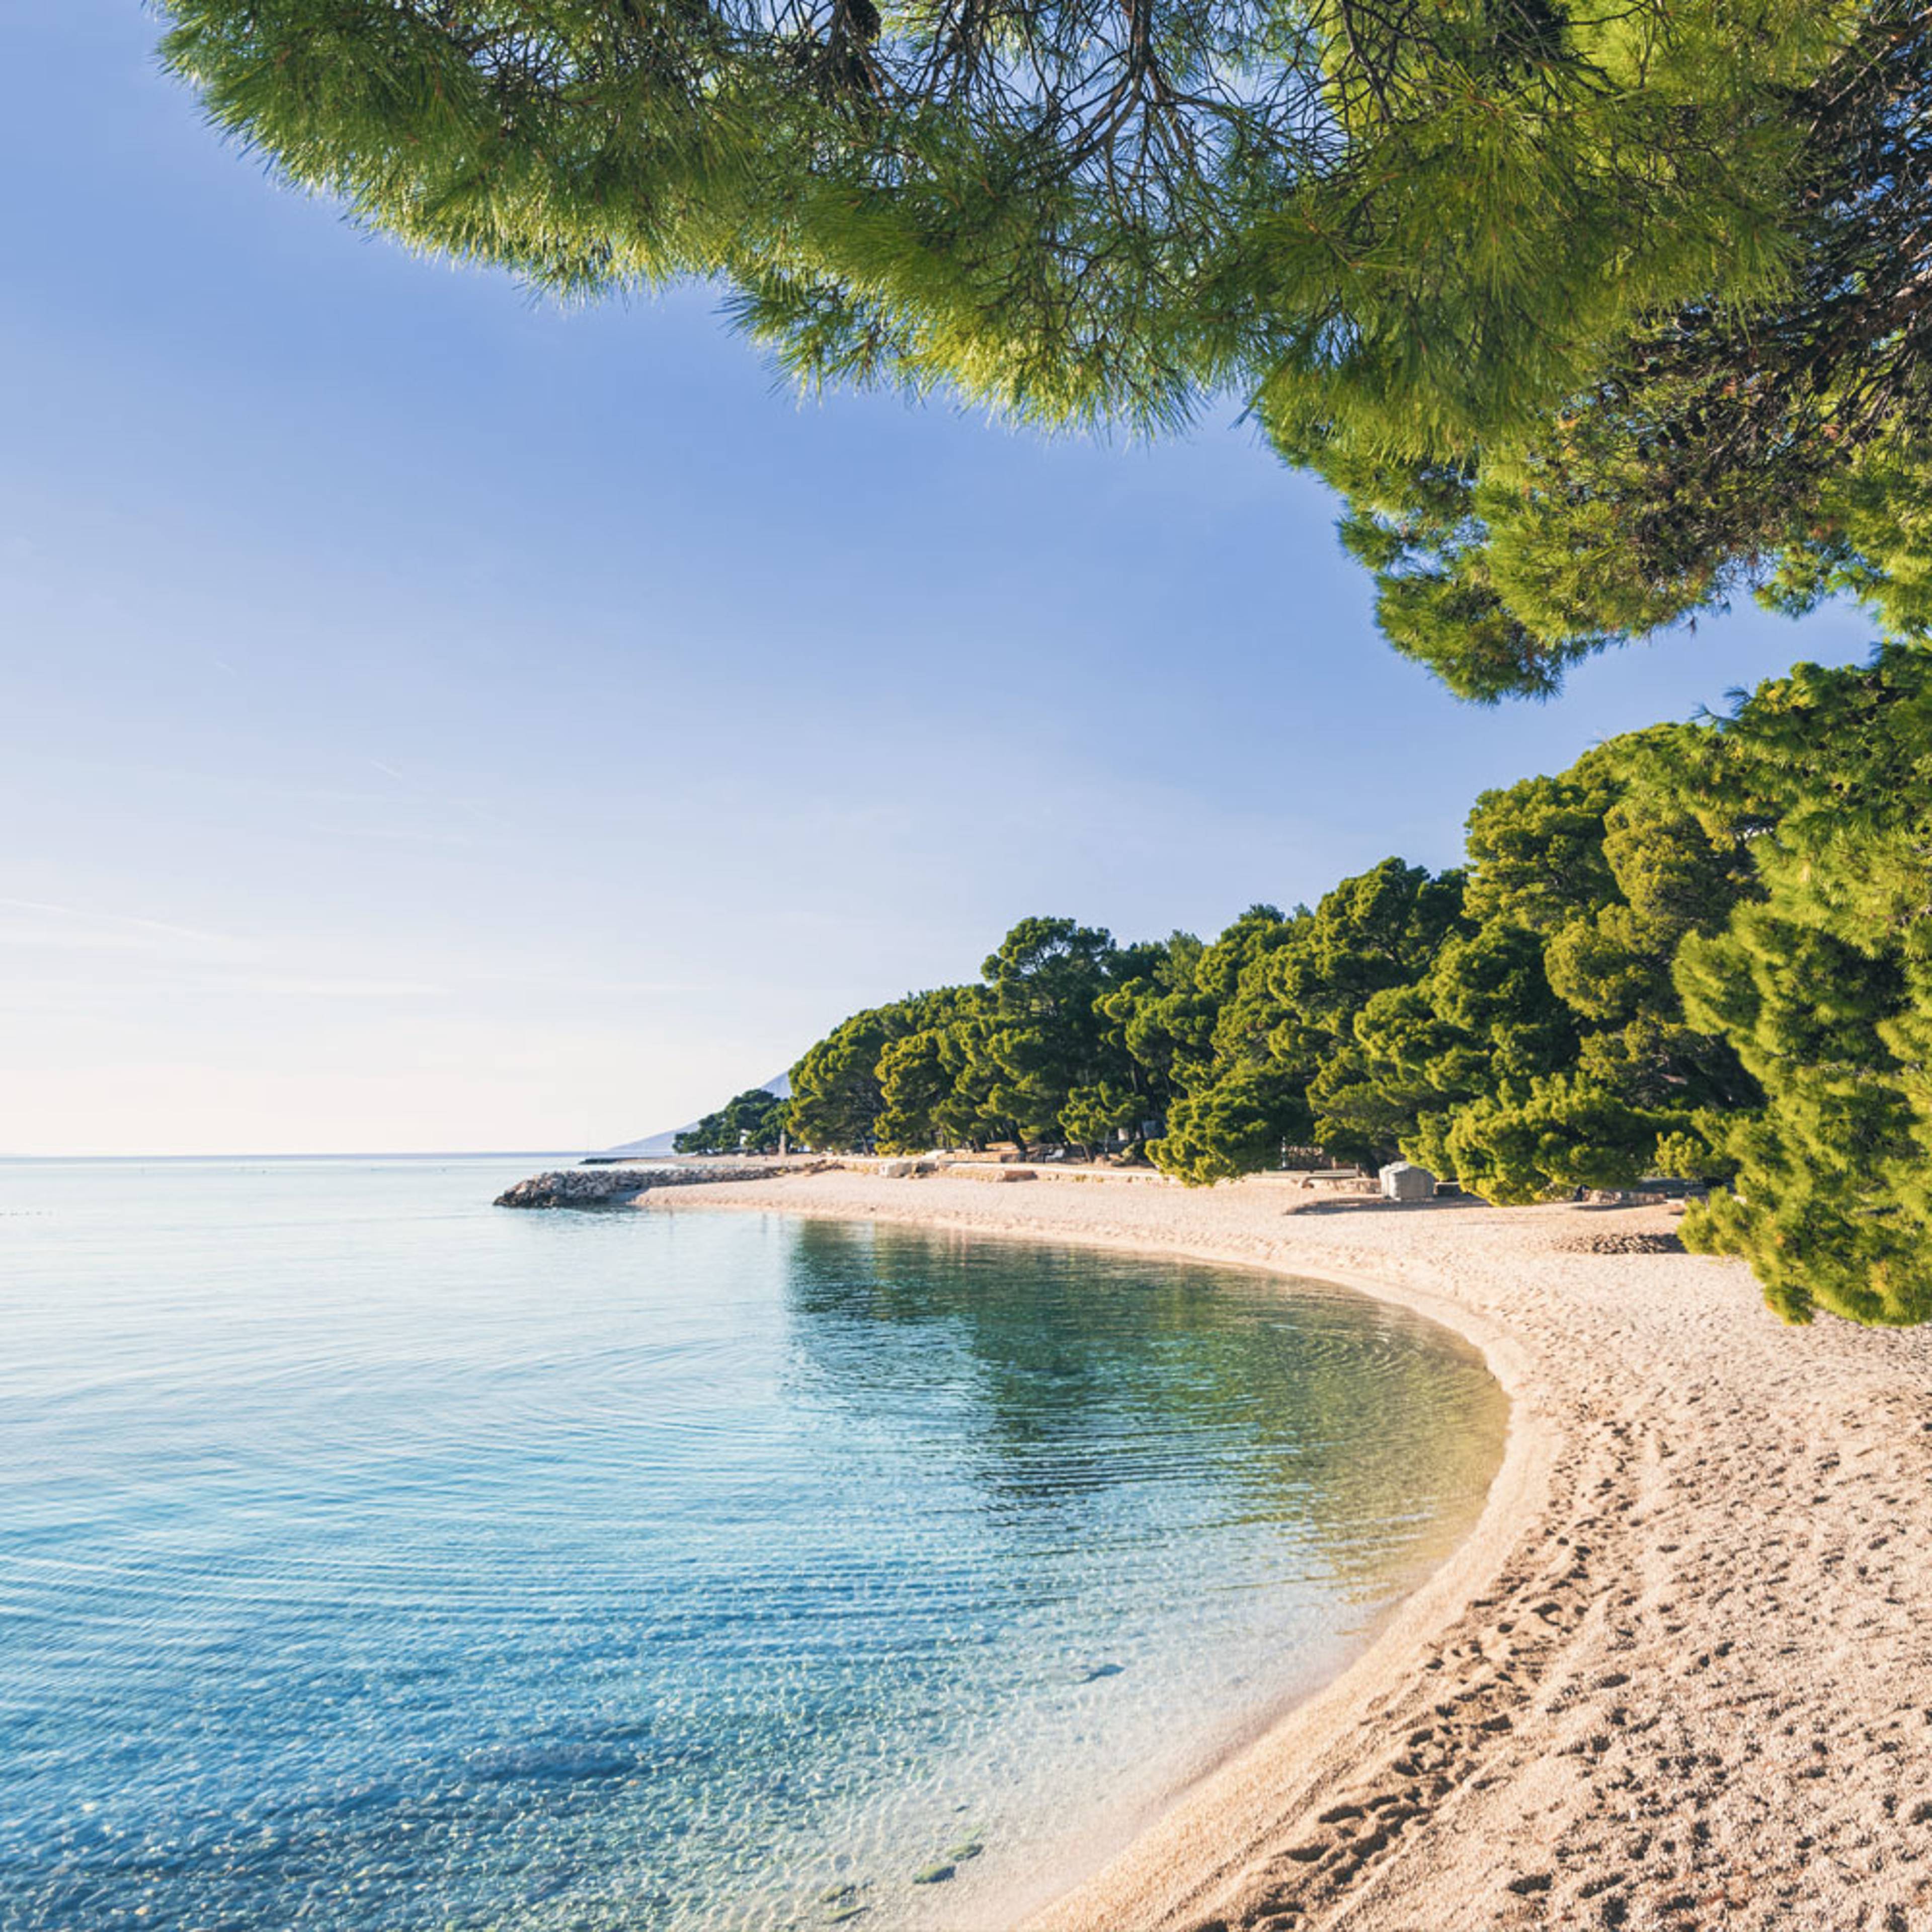 Design your perfect tour of Croatia's beaches with a local expert